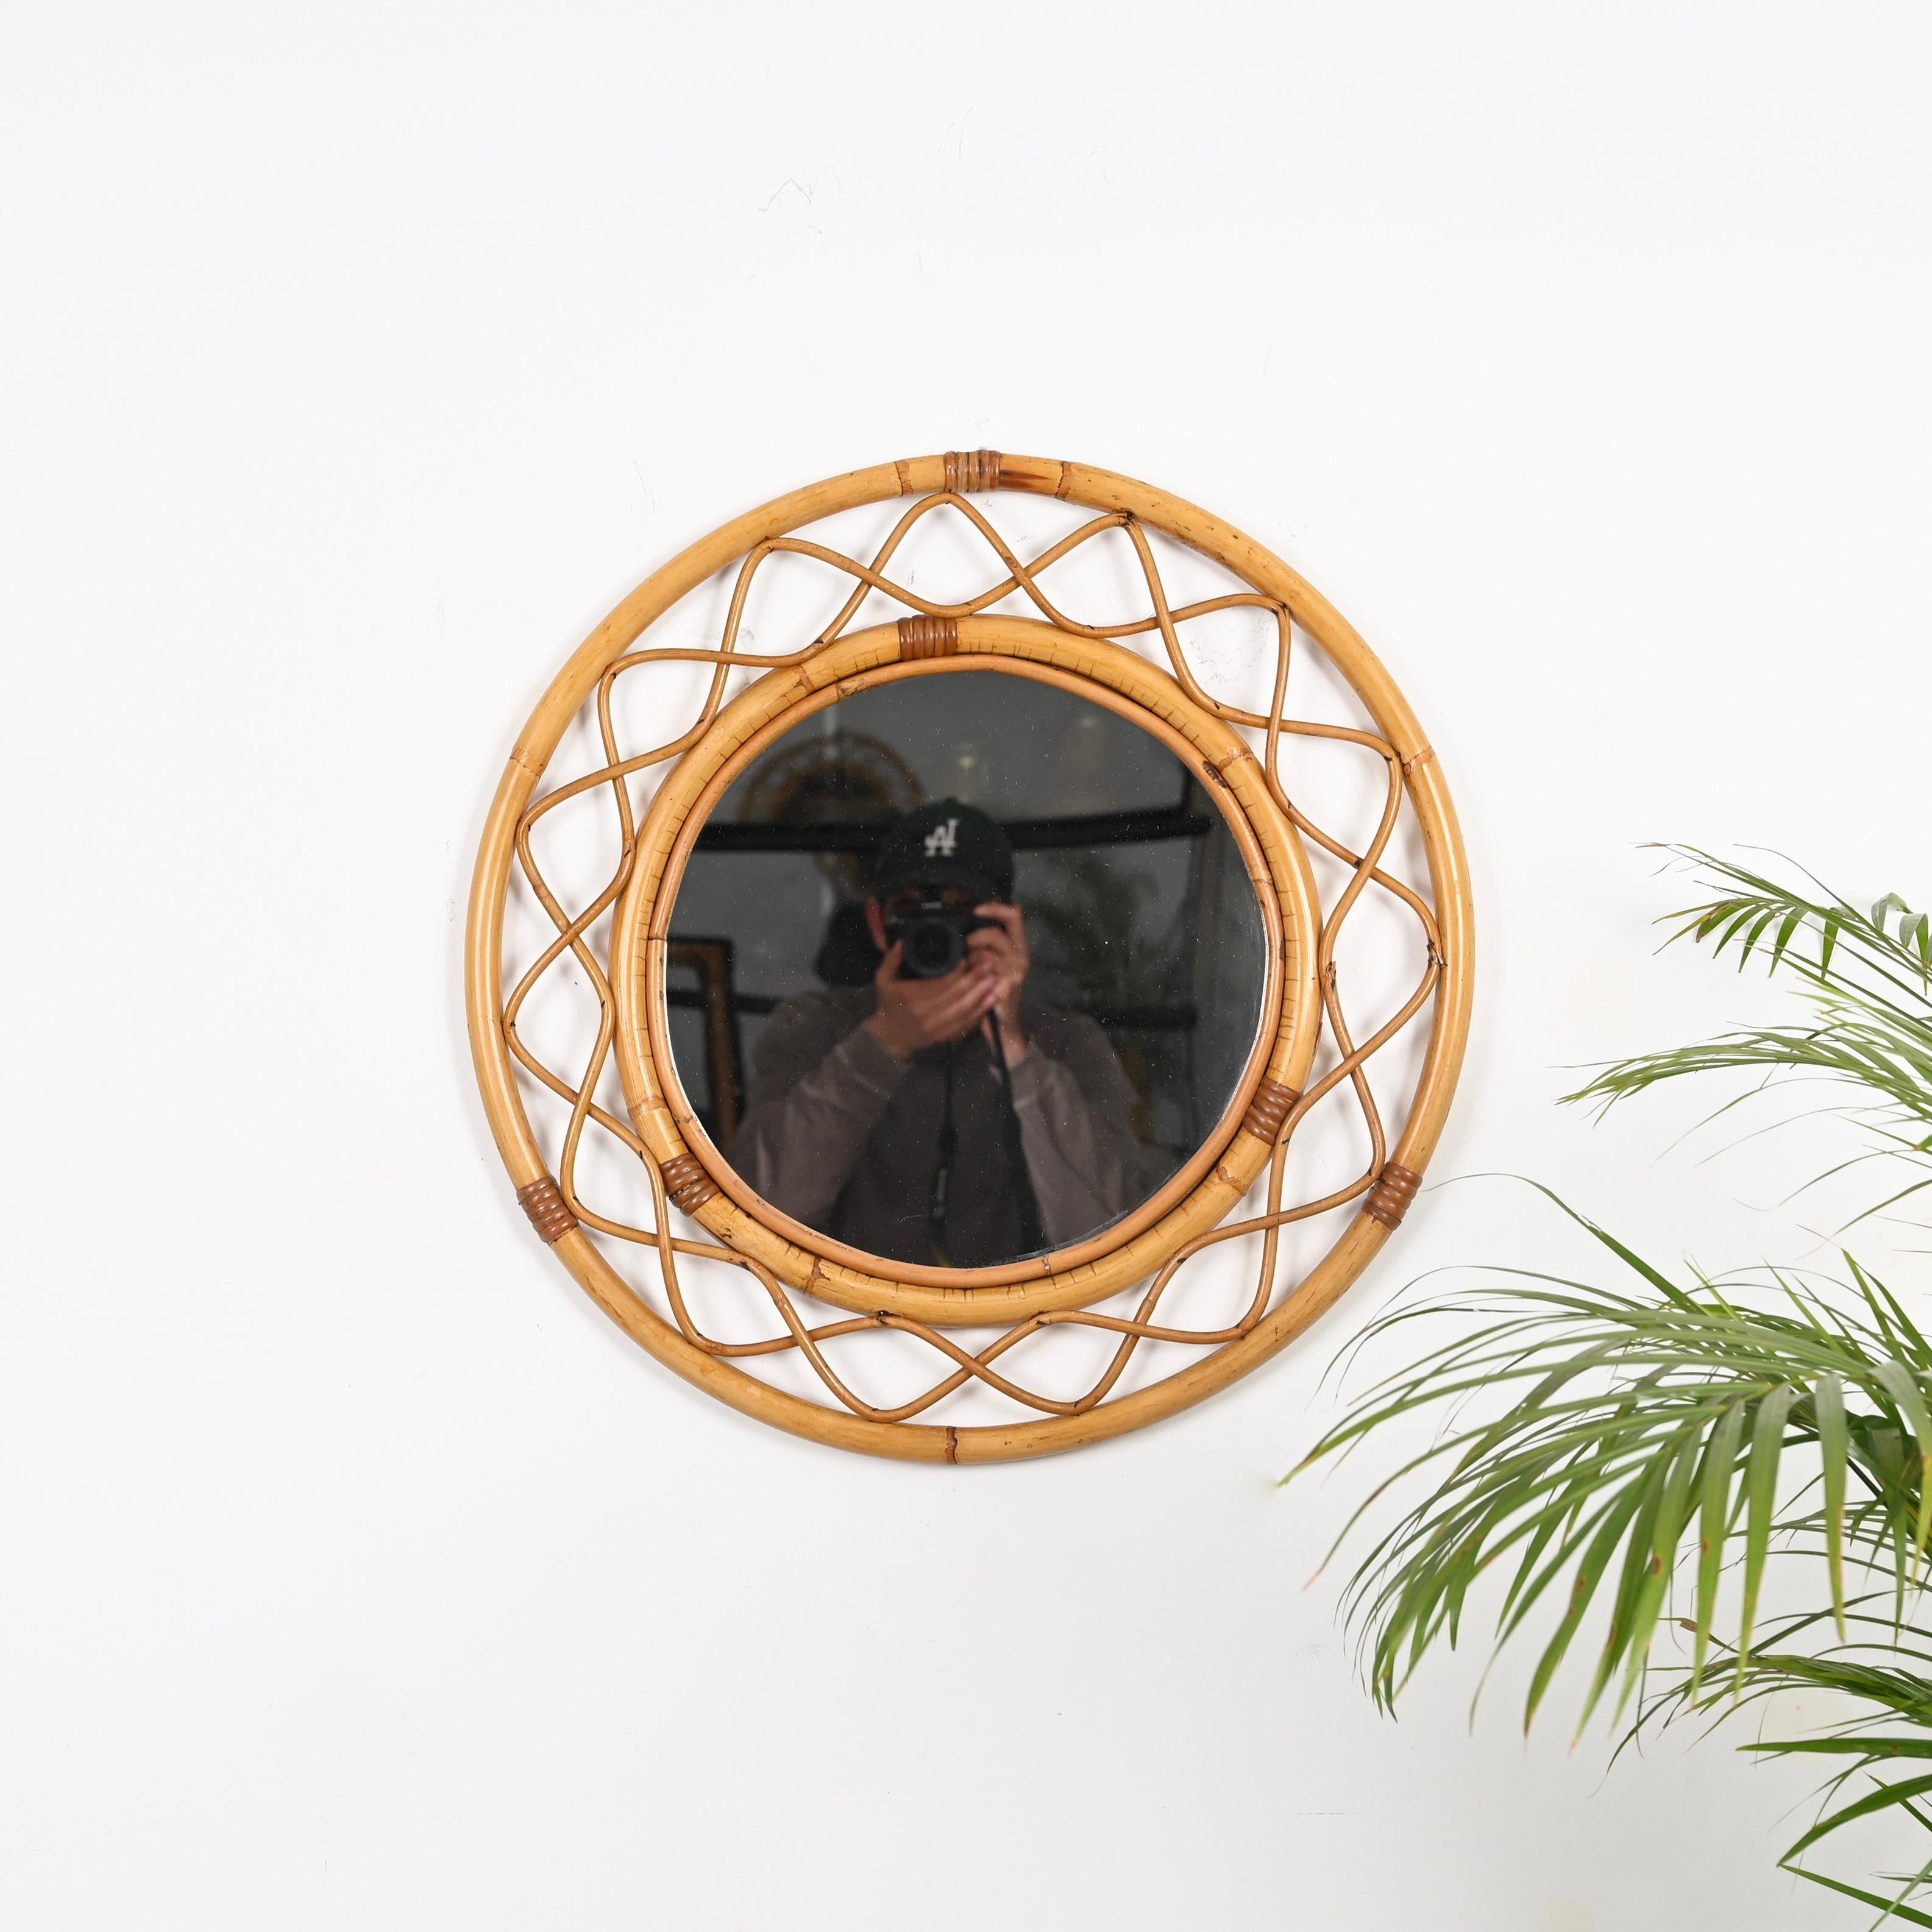 Mid-Century Modern Midcentury Round Italian Mirror, Curved Bamboo, Rattan and Wicker Frame, 1960s For Sale